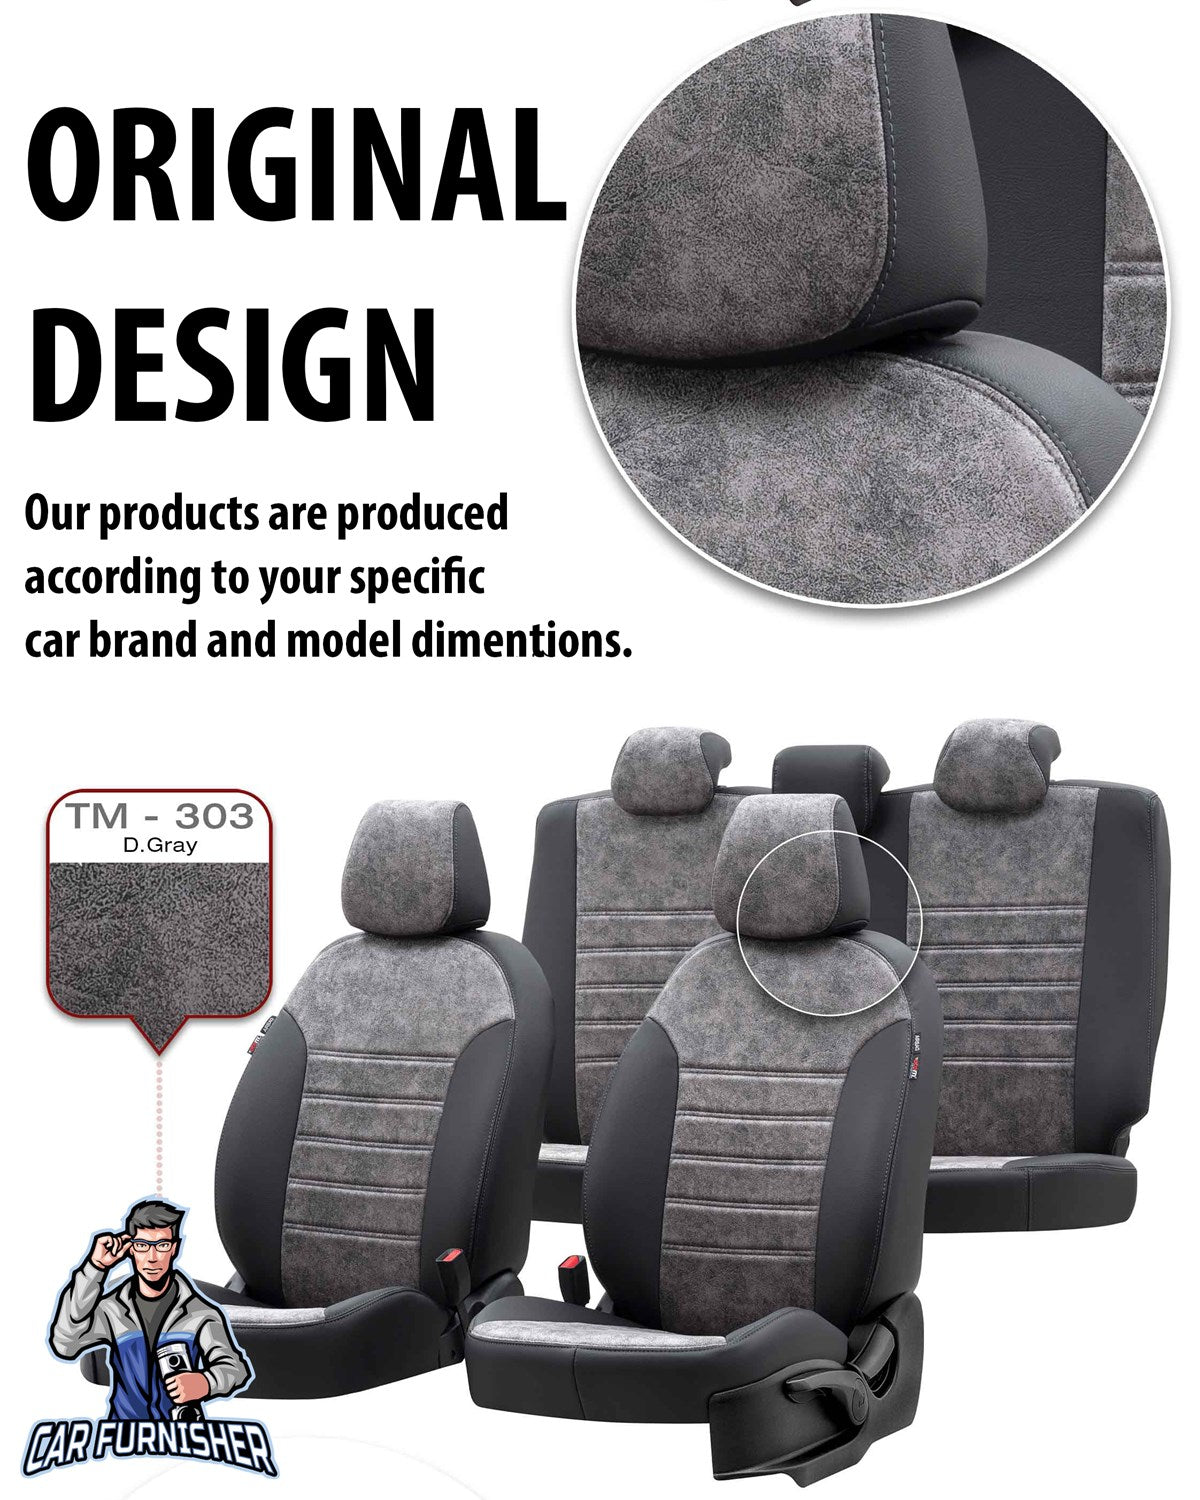 Renault Premium Seat Cover Milano Suede Design Burgundy Front Seats (2 Seats + Handrest + Headrests) Leather & Suede Fabric